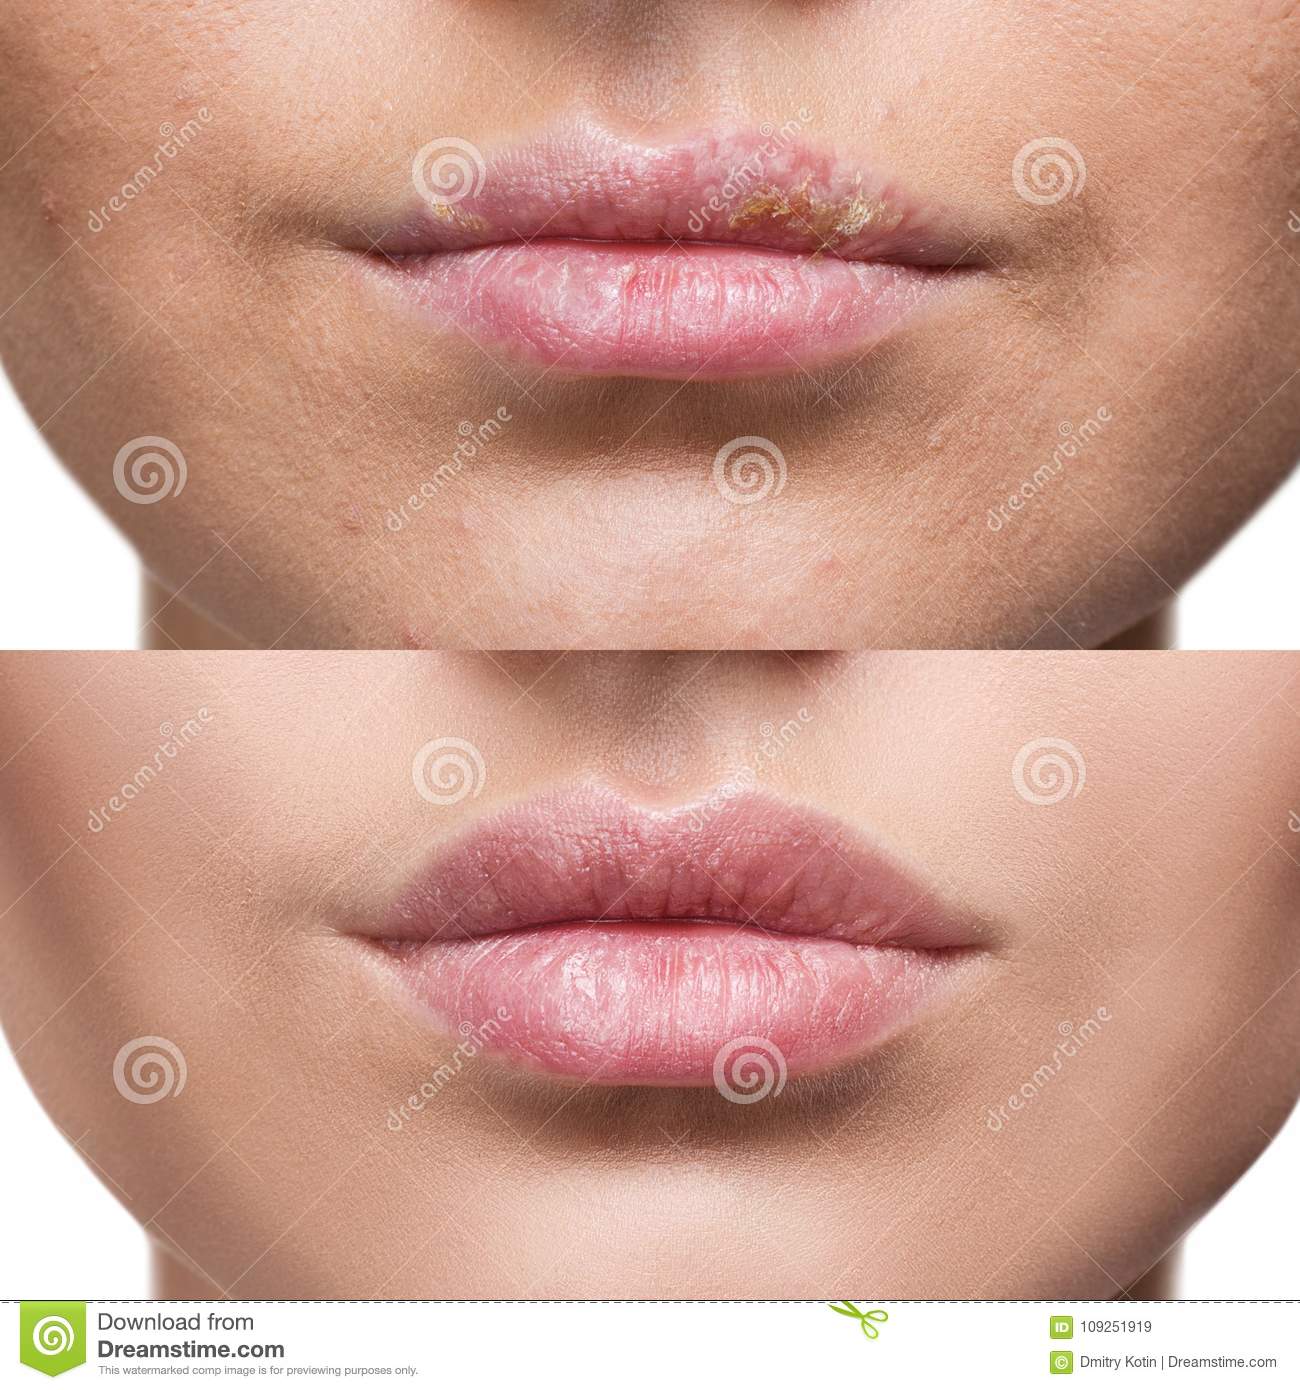 Lips With Herpes Before And After Treatment. Stock Image ...